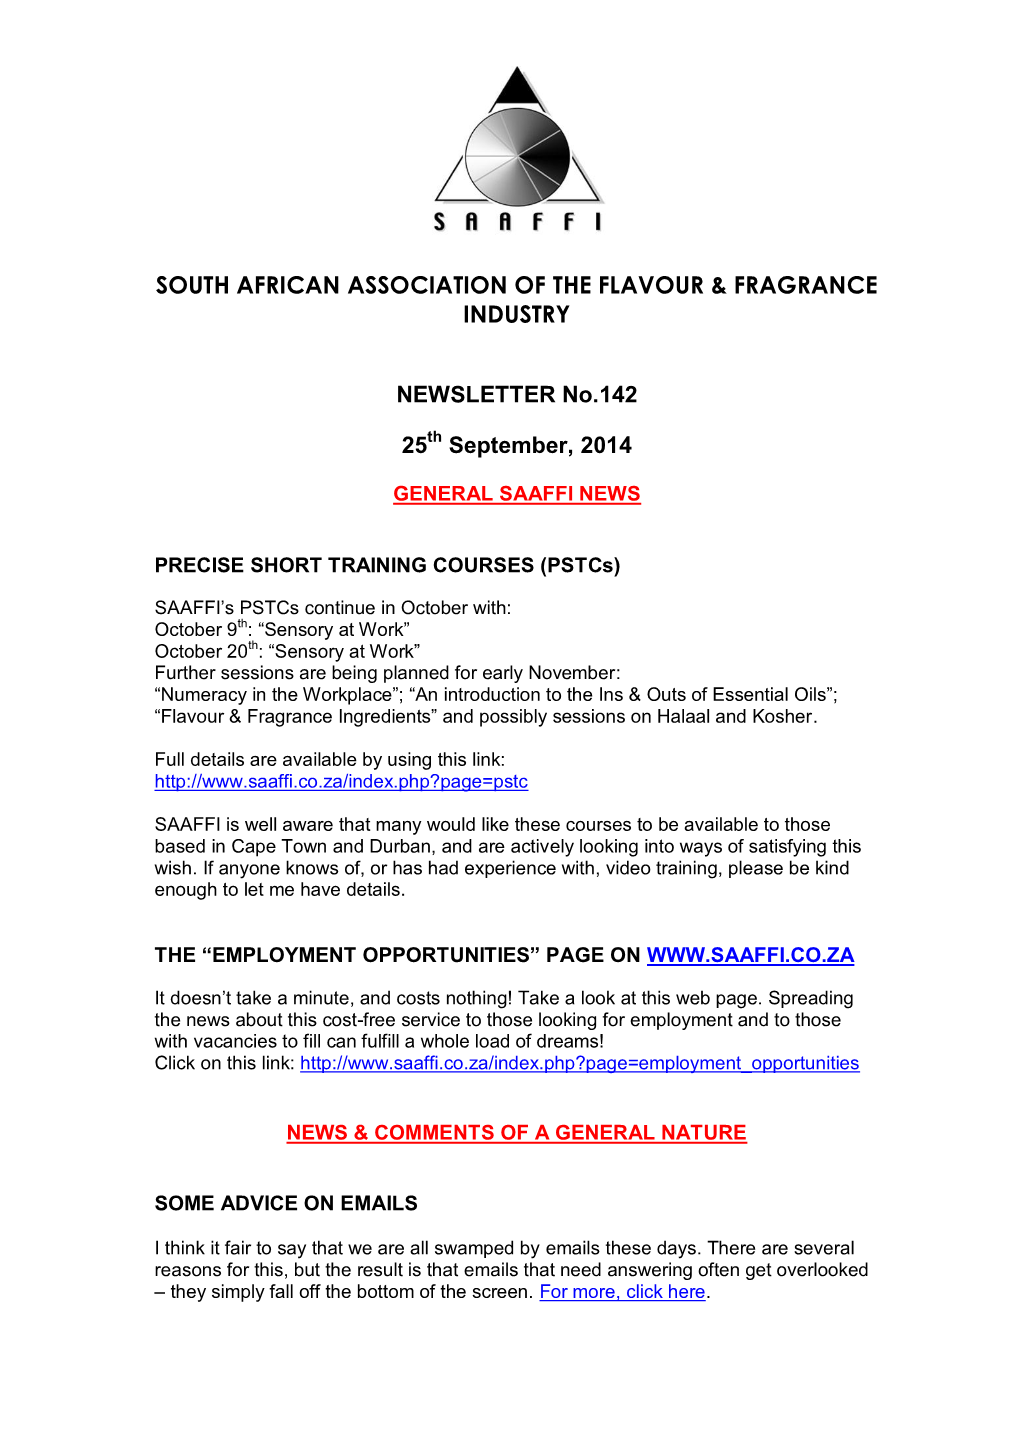 Constitution of the South African Association